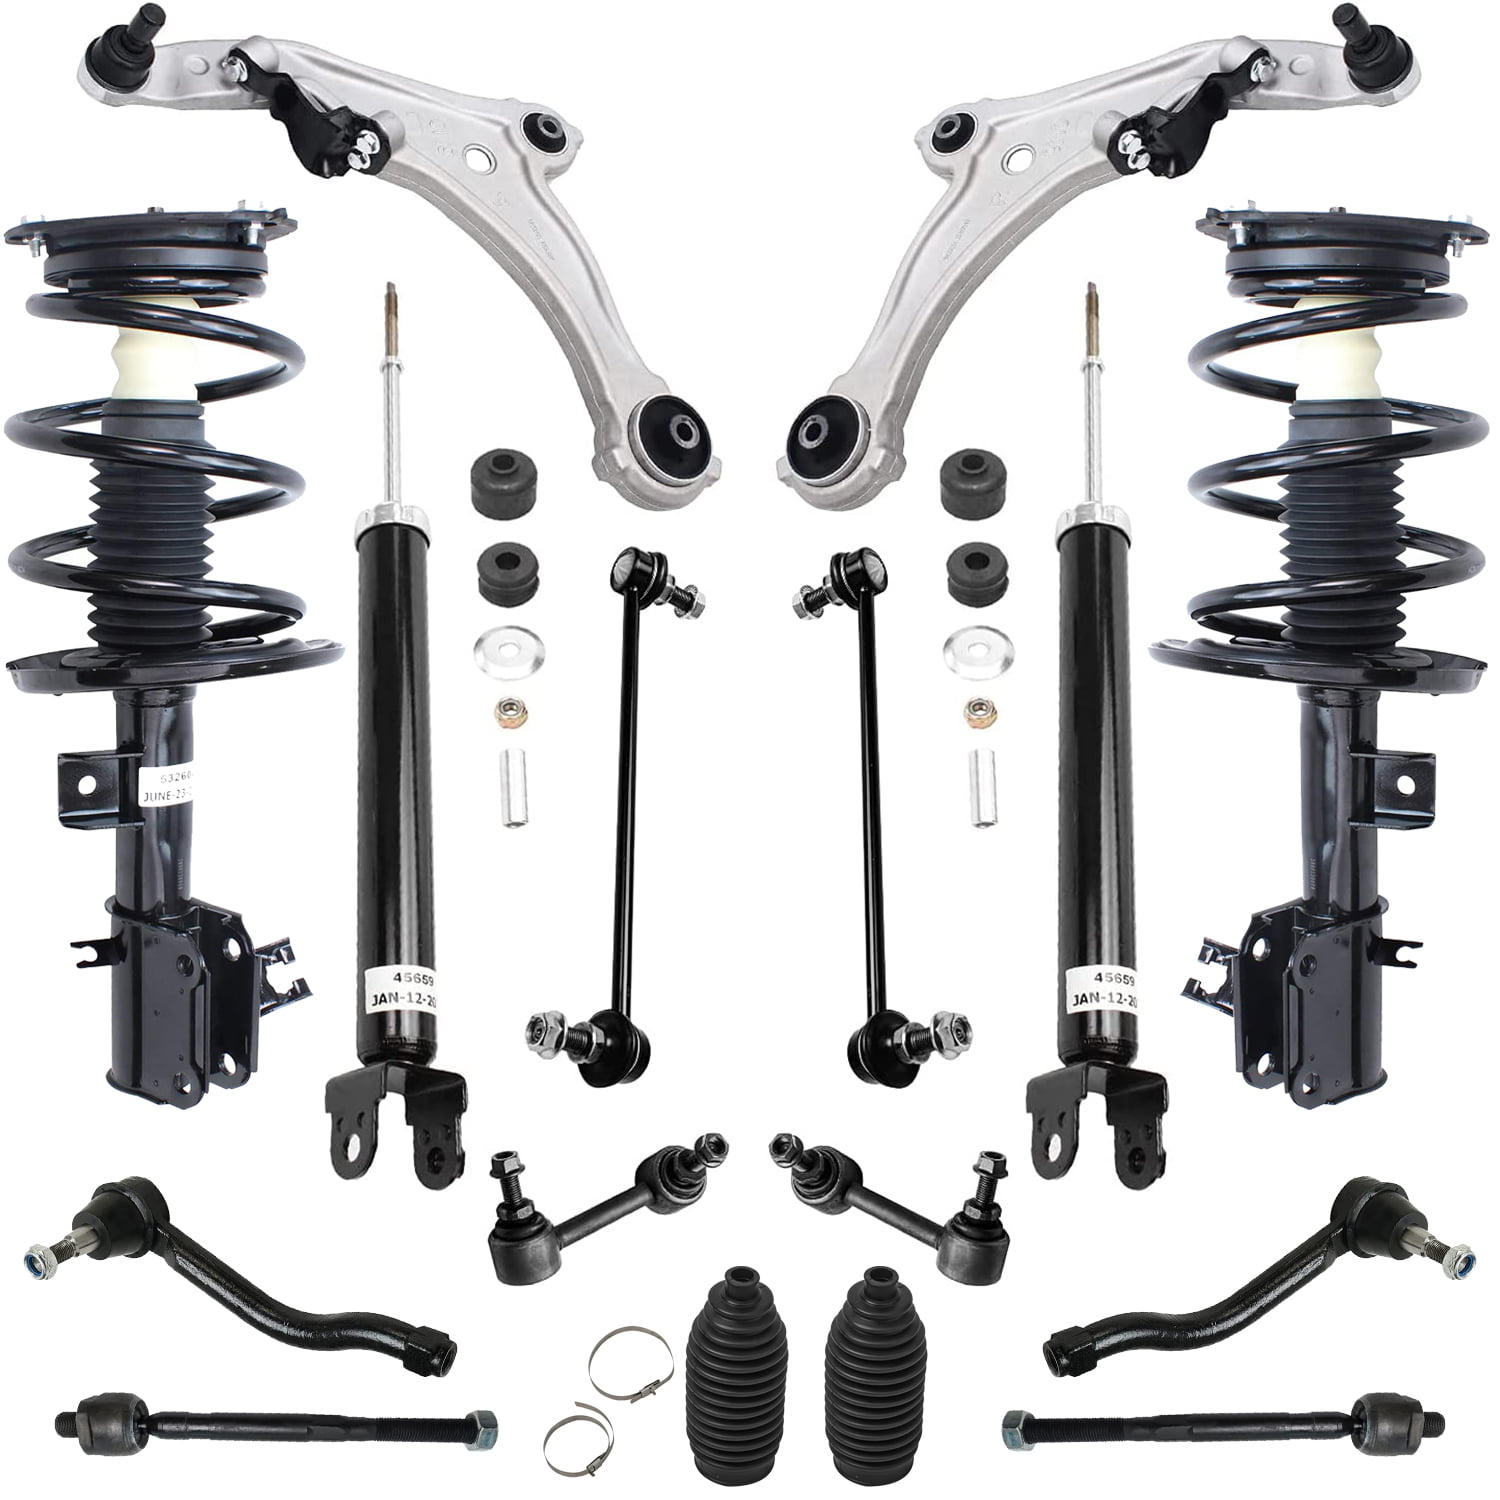 New 4-Piece Front Suspension Kit Detroit Axle 2 Pair Front Struts for 2006 2007 2008 2009 2010 2011 Ford Focus 2.0/2.3L Pair 2 Front Stabilizer Sway Bar 